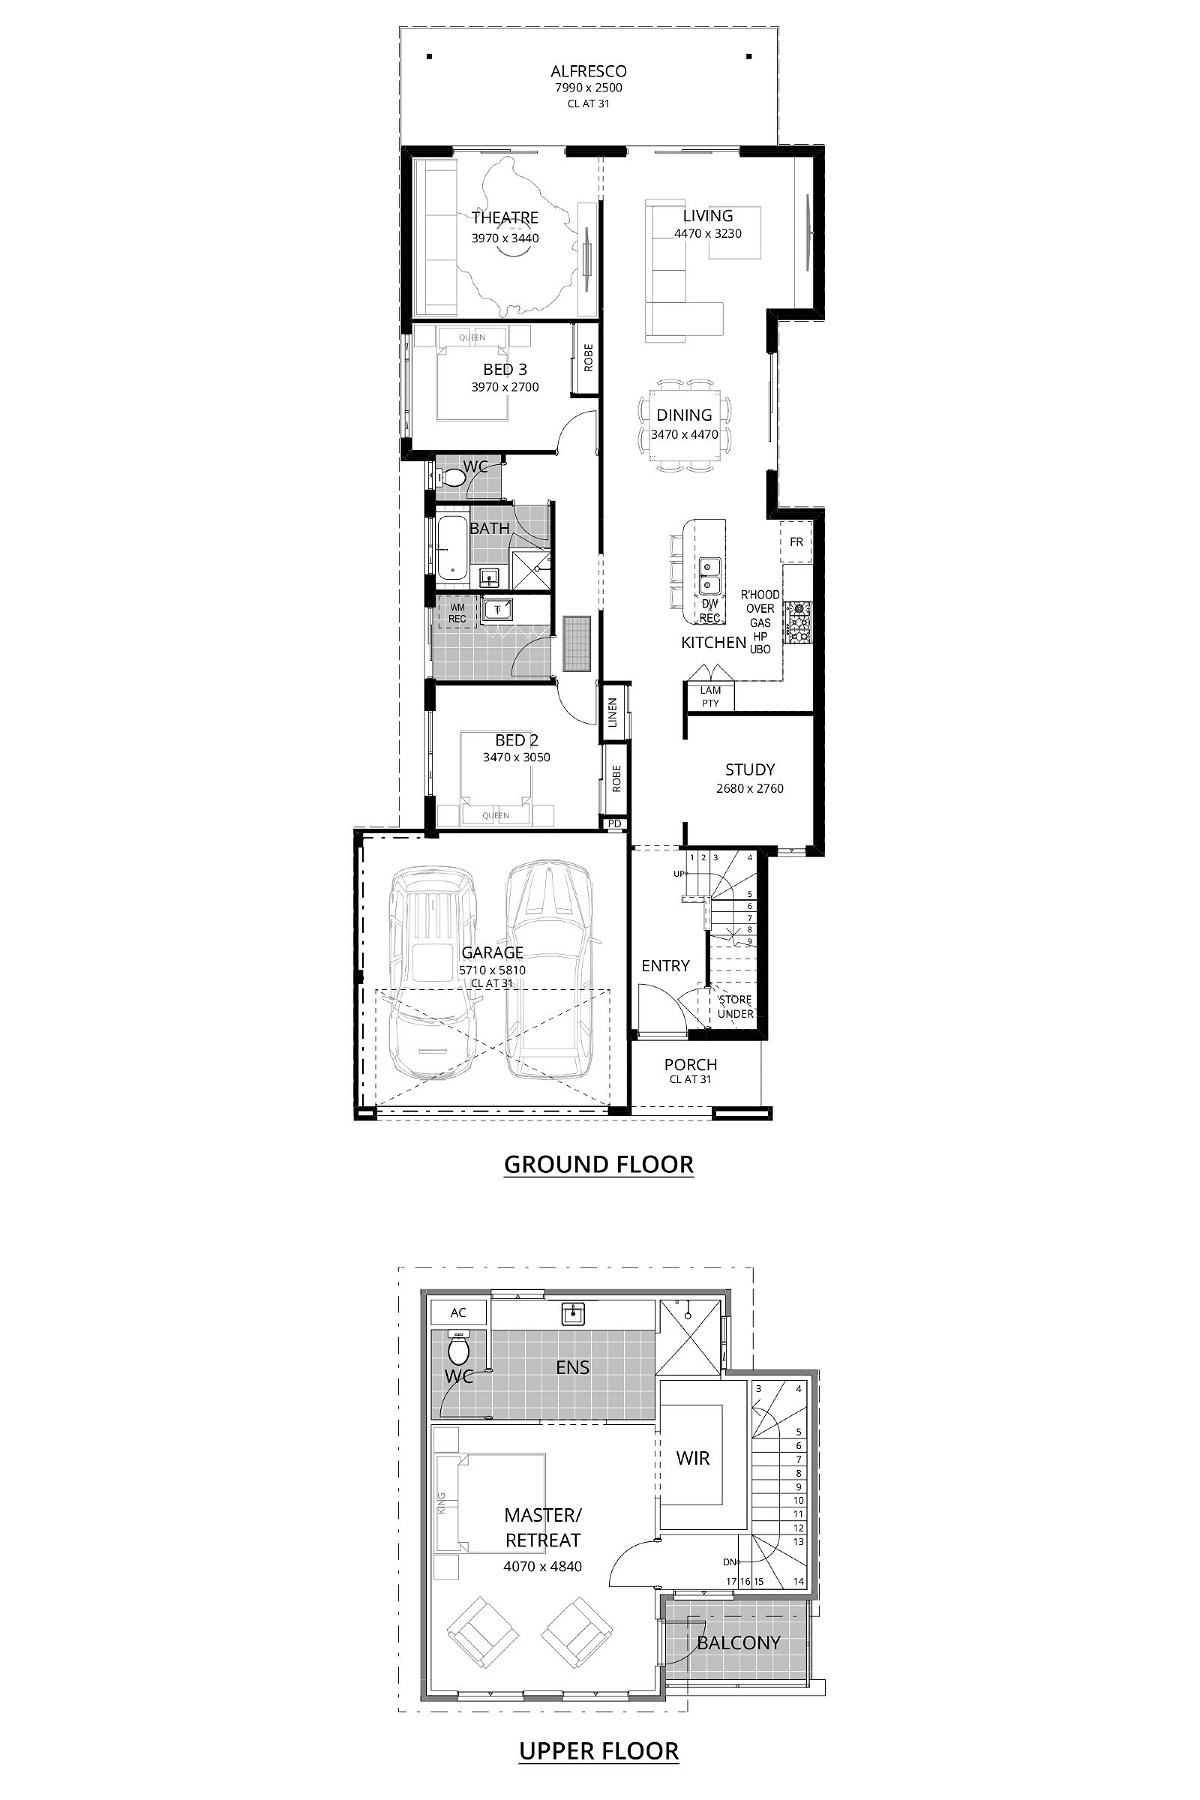 Residential Attitudes - Dark Side Of The Moon - Floorplan - Dark Side Of The Moon Website Floorplans